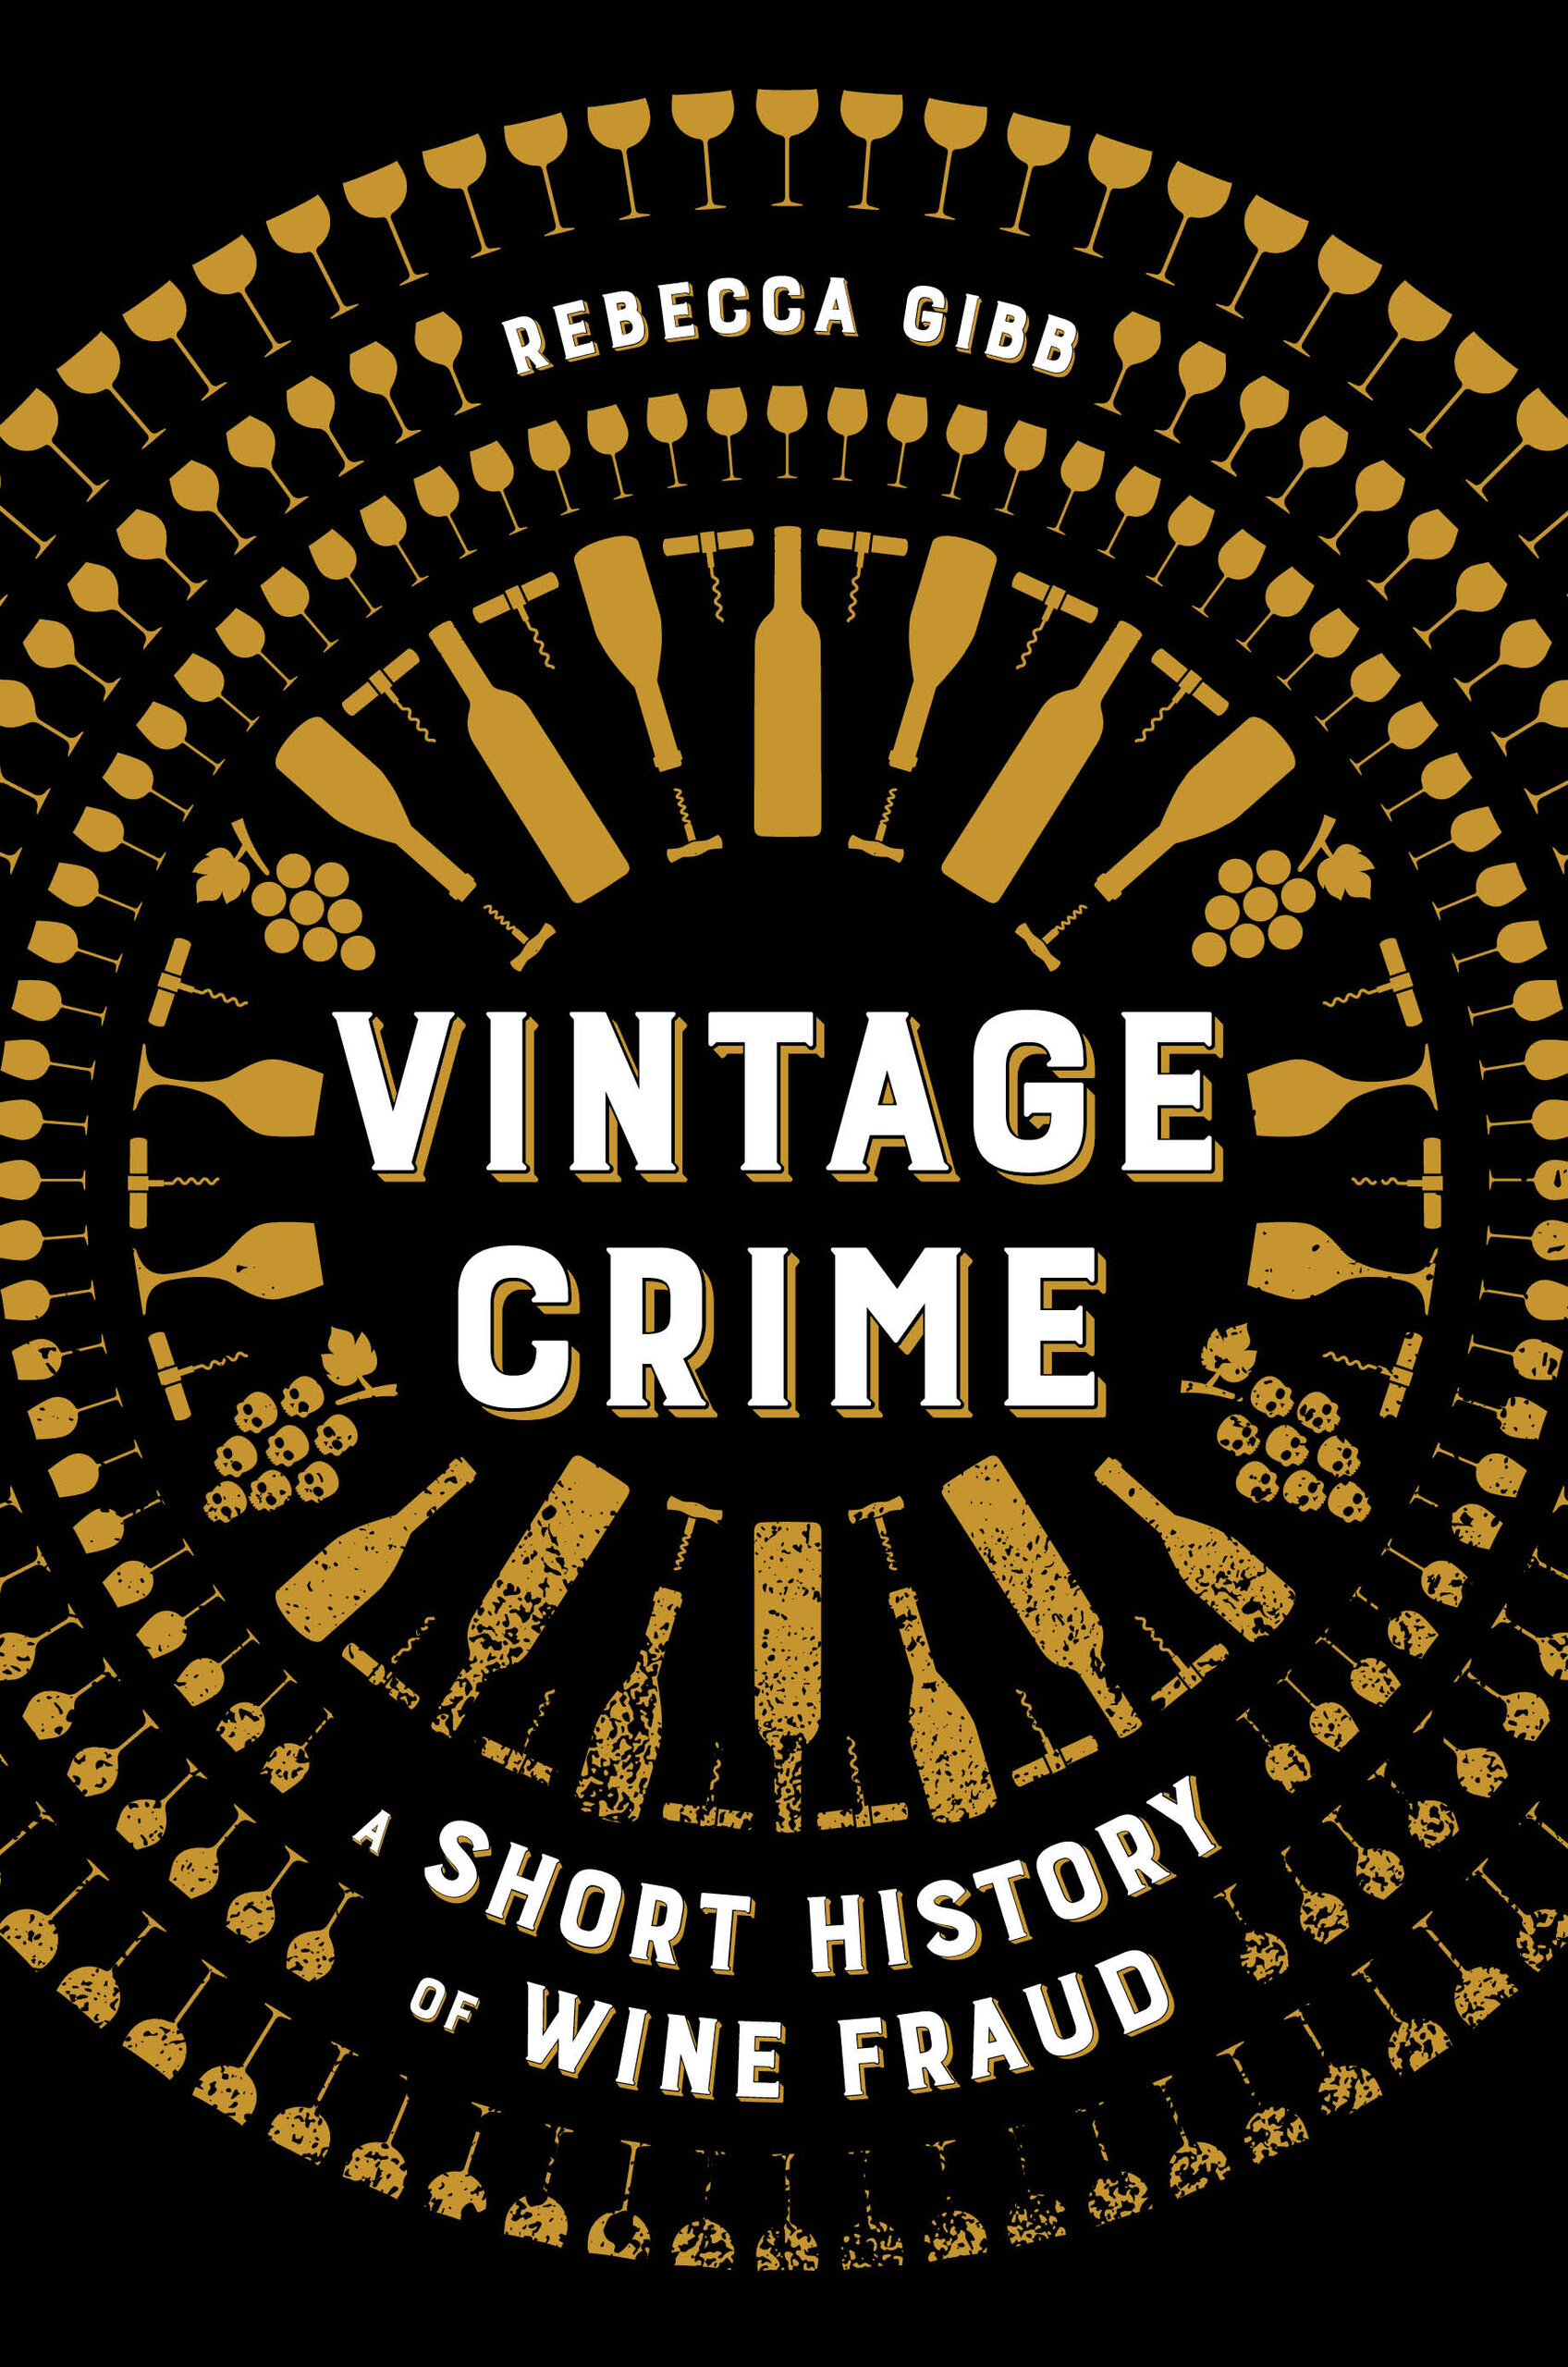 The cover of Vintage Crime: a short history of wine fraud